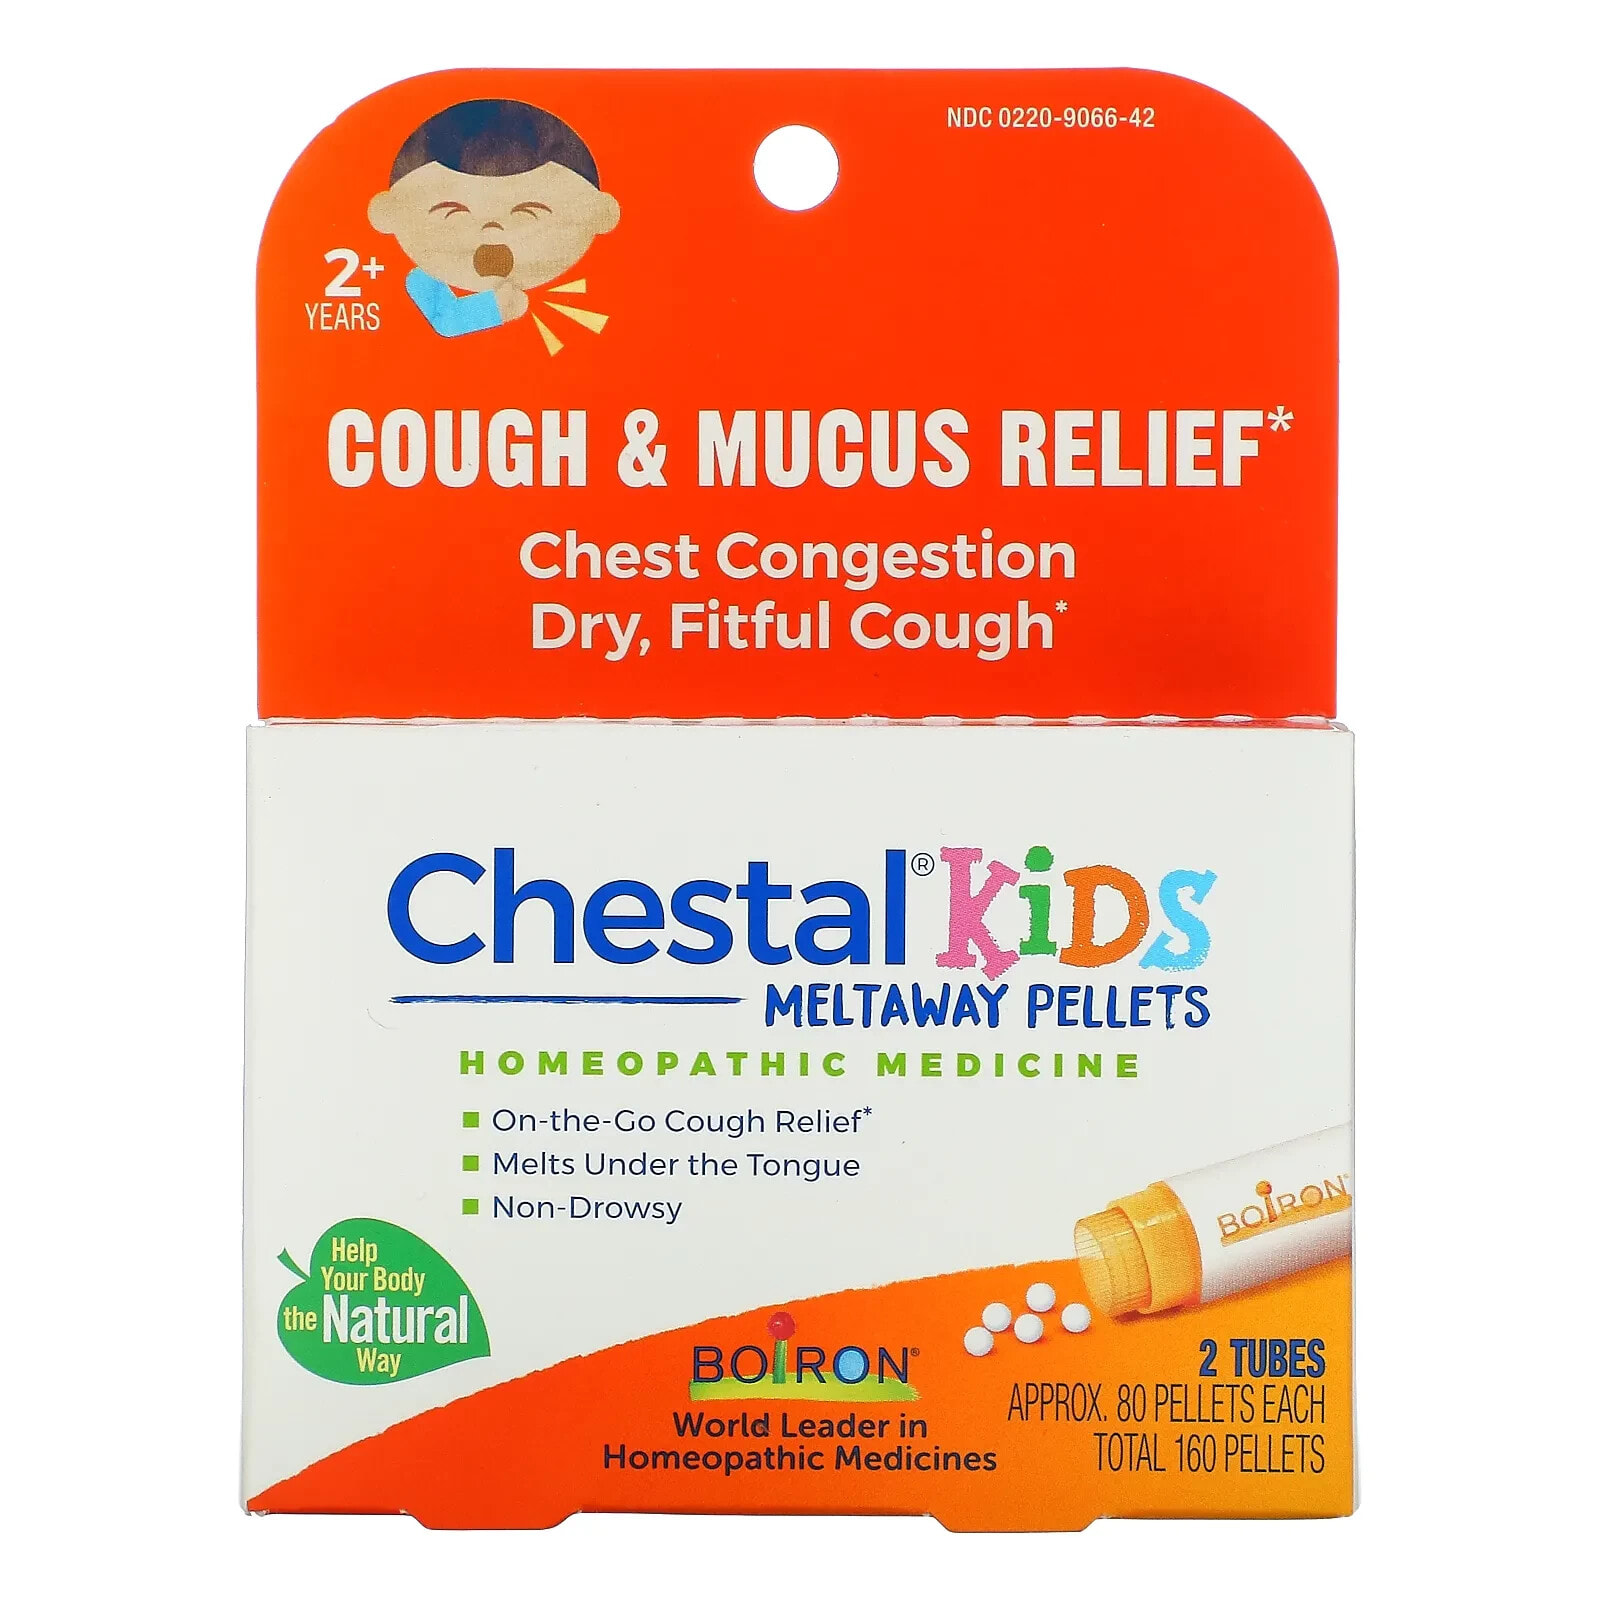 Kids, Chestal Meltaway Pellets, Cough & Mucus Relief, 2+ Years, 2 Tubes, Approx. 80 Pellets Each